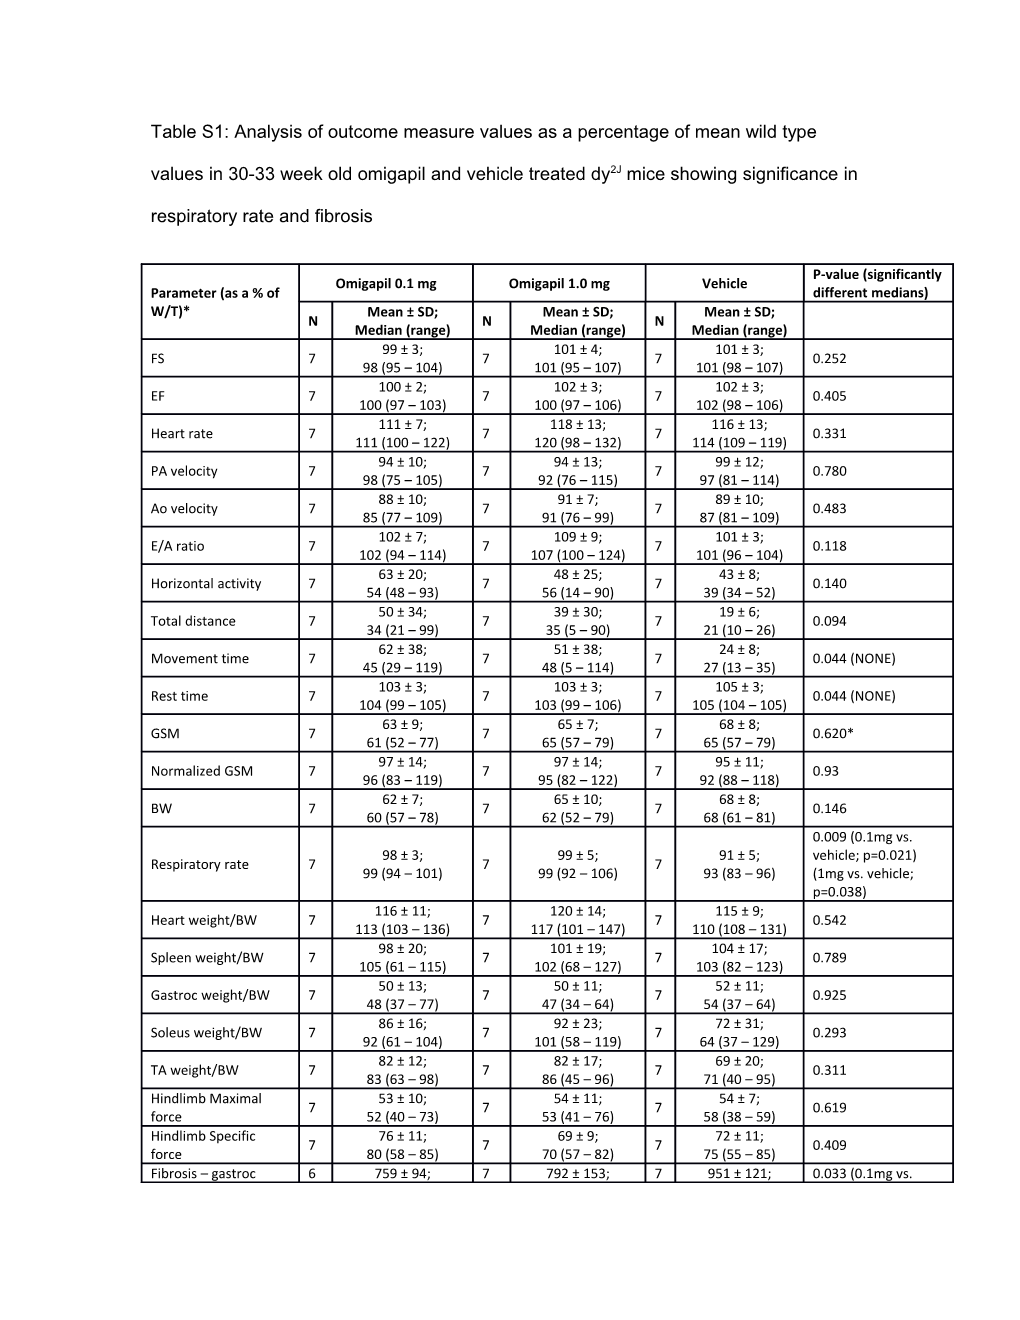 Table S1: Analysis of Outcome Measure Values As a Percentage of Mean Wild Type Values In